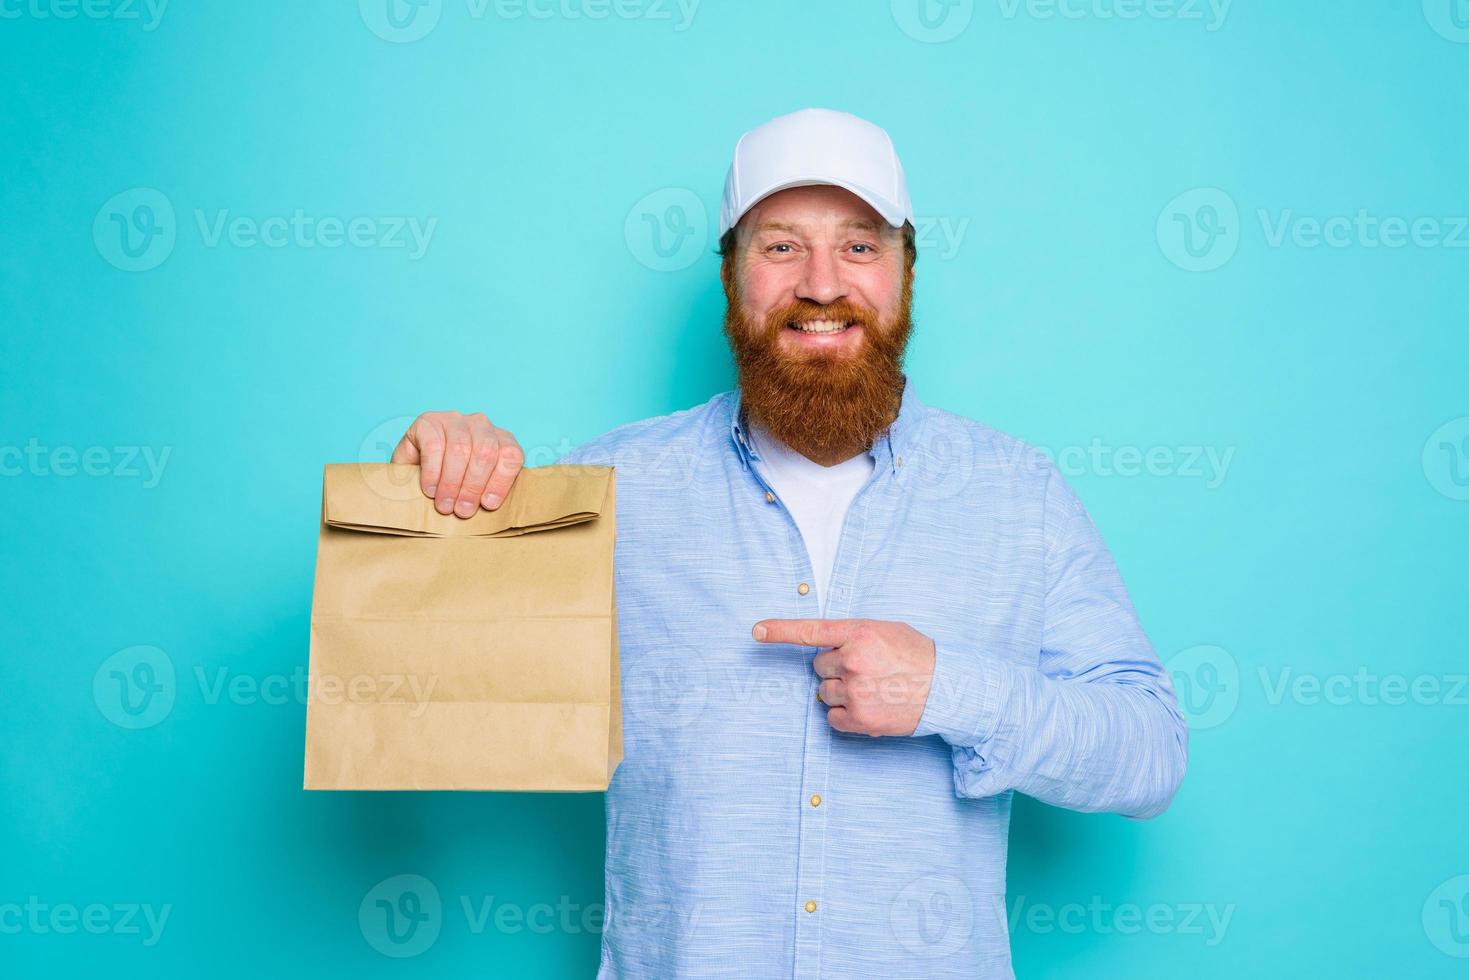 Deliveryman with happy expression is ready to deliver a food package photo